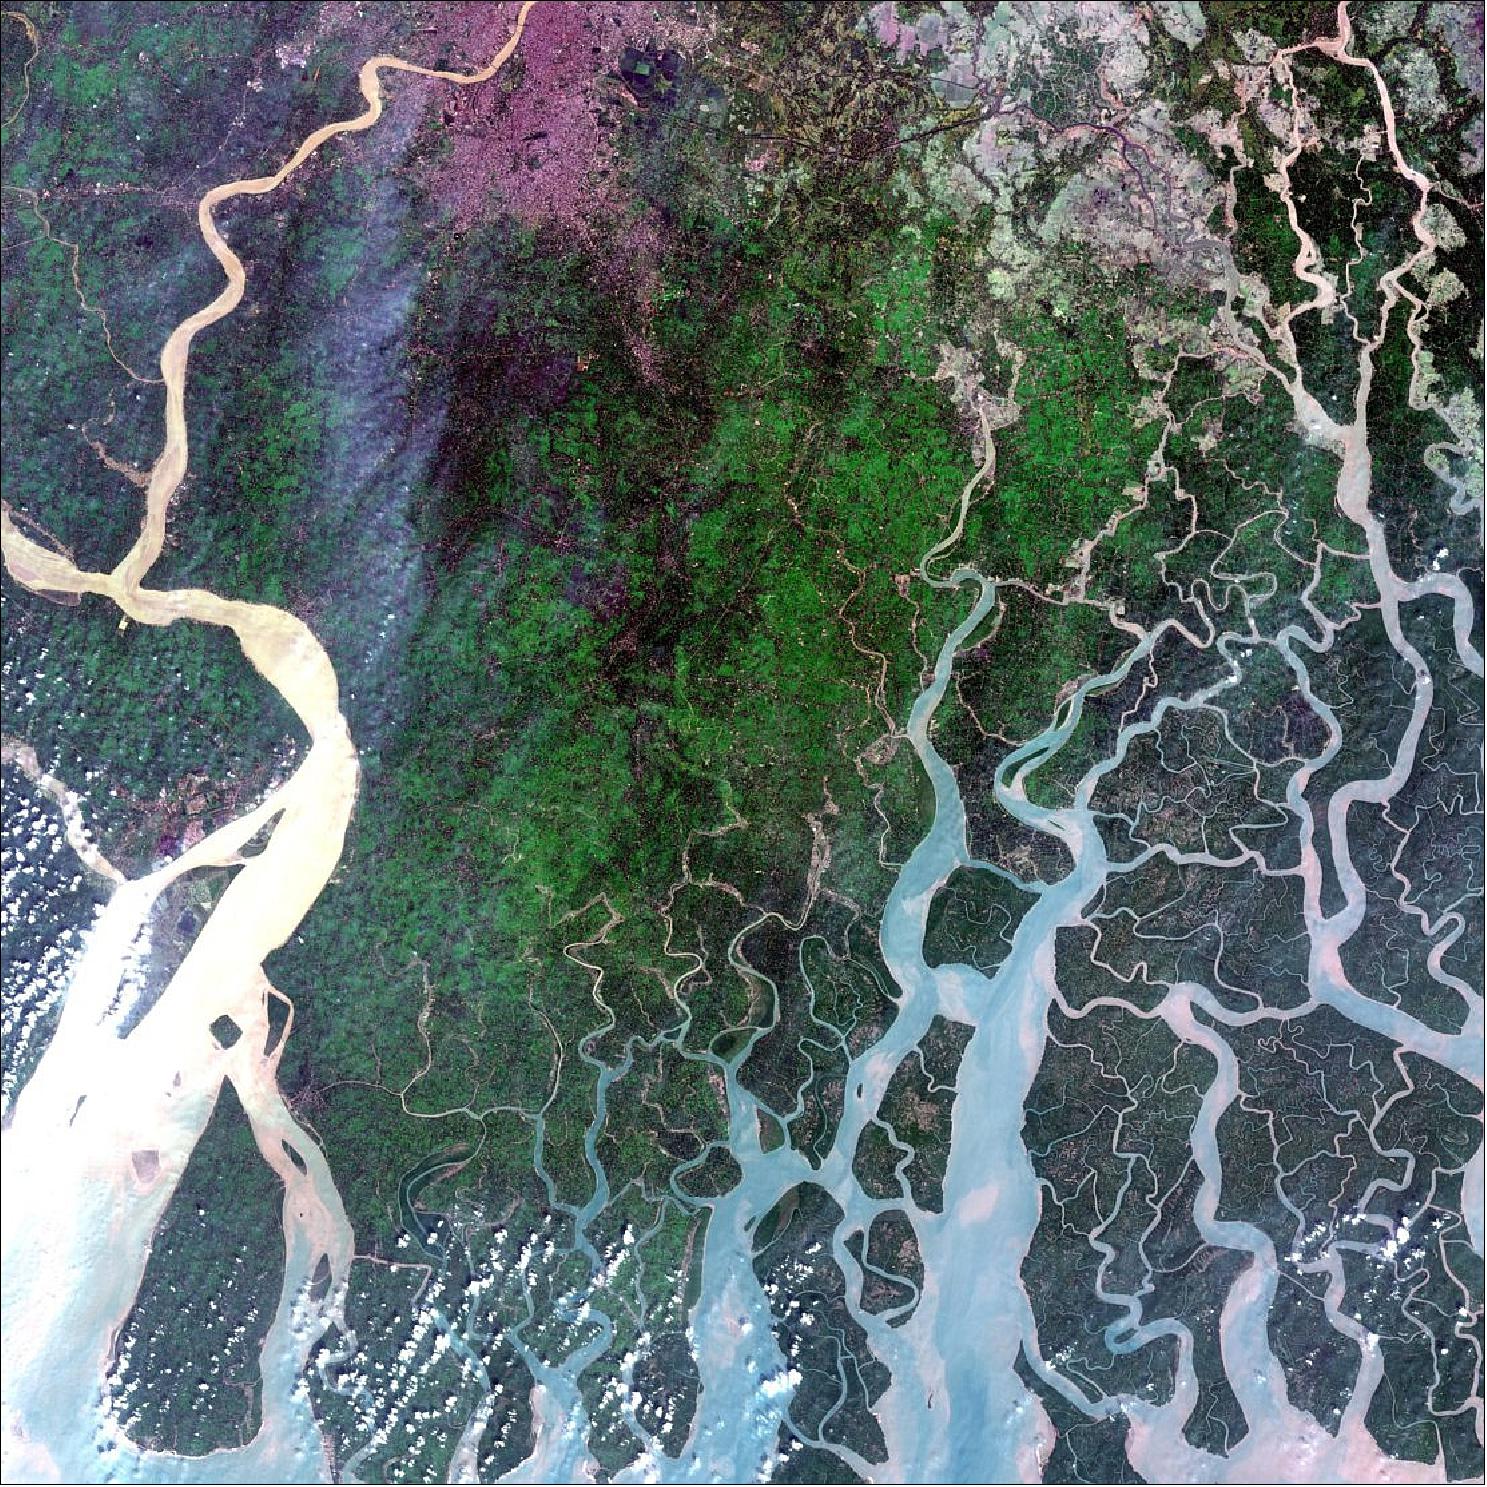 Figure 18: A false-color image showing part of the Ganges Delta in south Asia, captured by the Copernicus Sentinel-2B satellite and relayed by EDRS-A on 27 October 2017 (image credit: ESA, the image contains modified Copernicus Sentinel data (2017), processed by ESA, CC BY-SA 3.0 IGO)